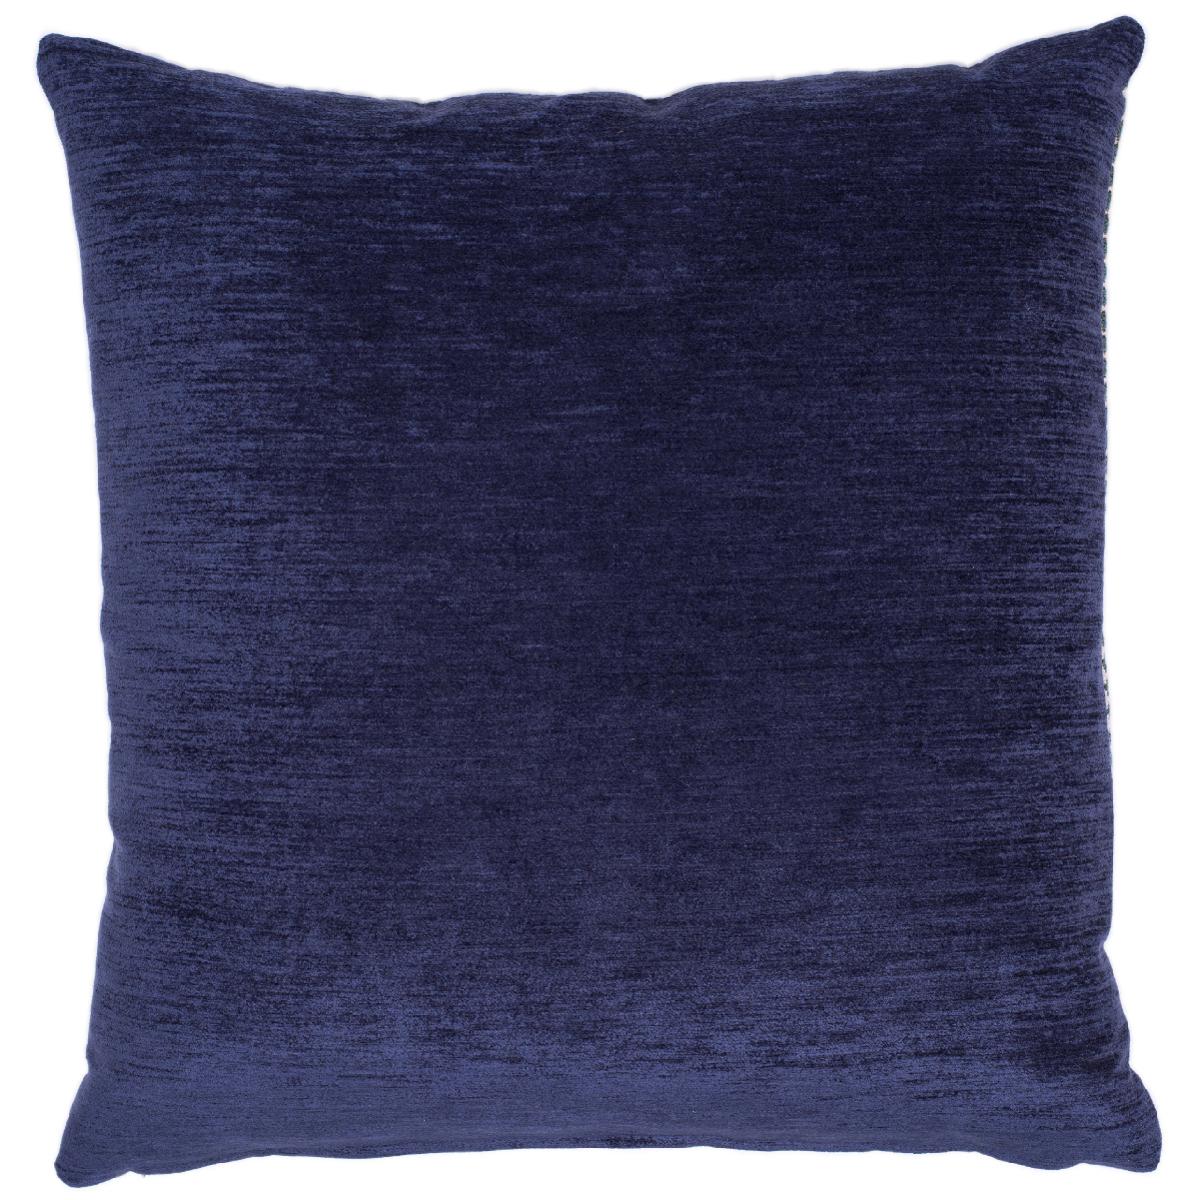 COLOUR: Blue
FRONT MATERIAL: 76% Viscose, 11% Polyester, 13% Cotton Jacquard woven fabric
BACK MATERIAL: Chenille 
FILLER: Feather
STOCK SIZE: 60cm x 60cm (approx)
ORIGIN: Fabric produced in Turkey, cushions made in the UK

Here at Knots we have